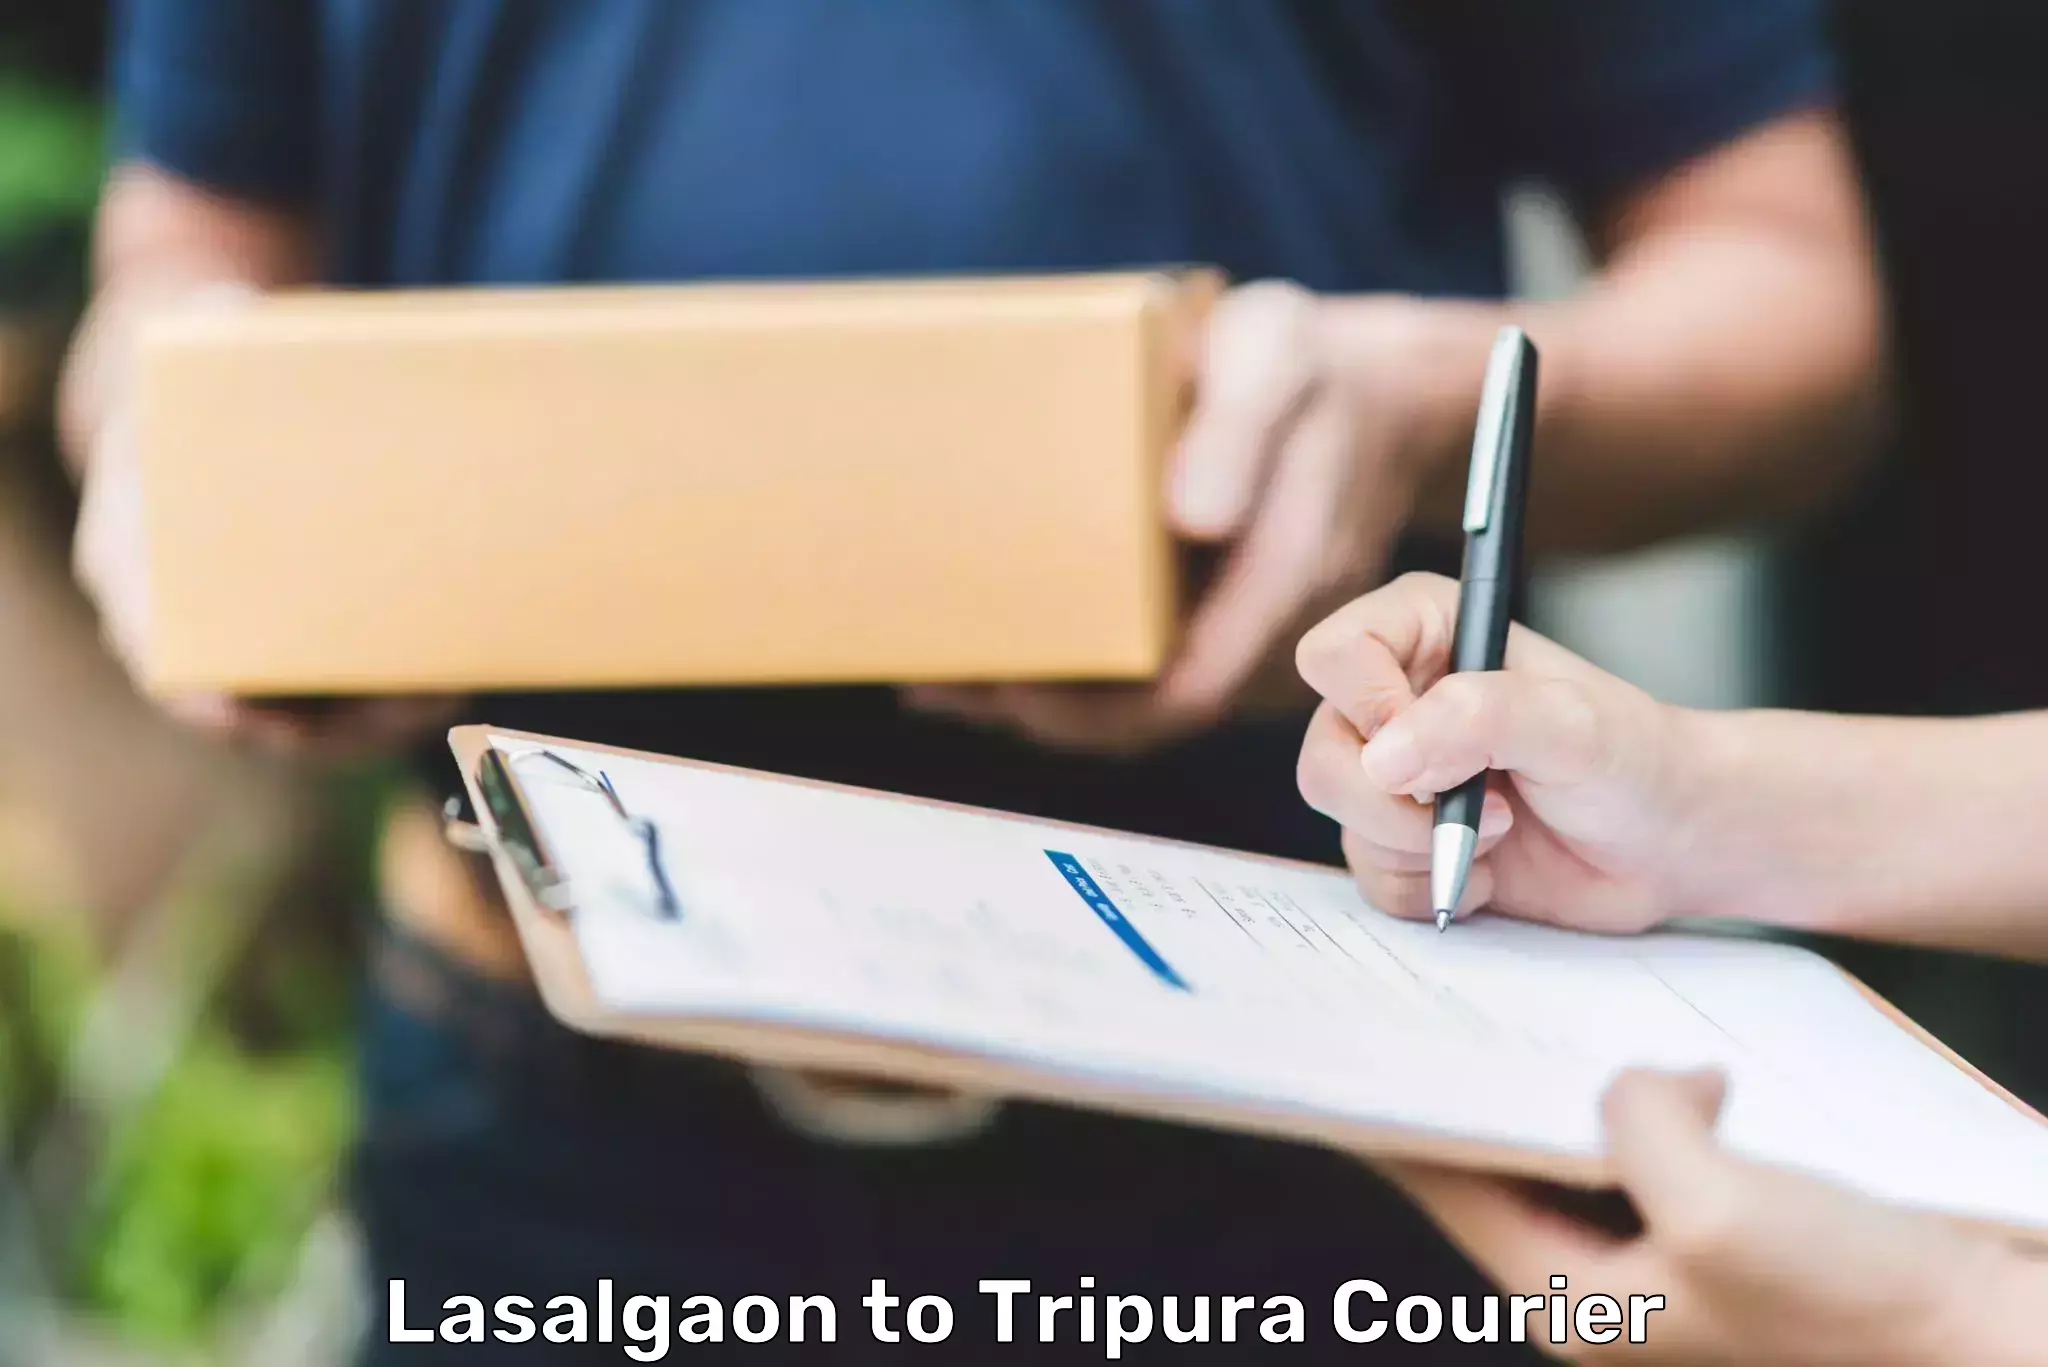 State-of-the-art courier technology Lasalgaon to Udaipur Tripura